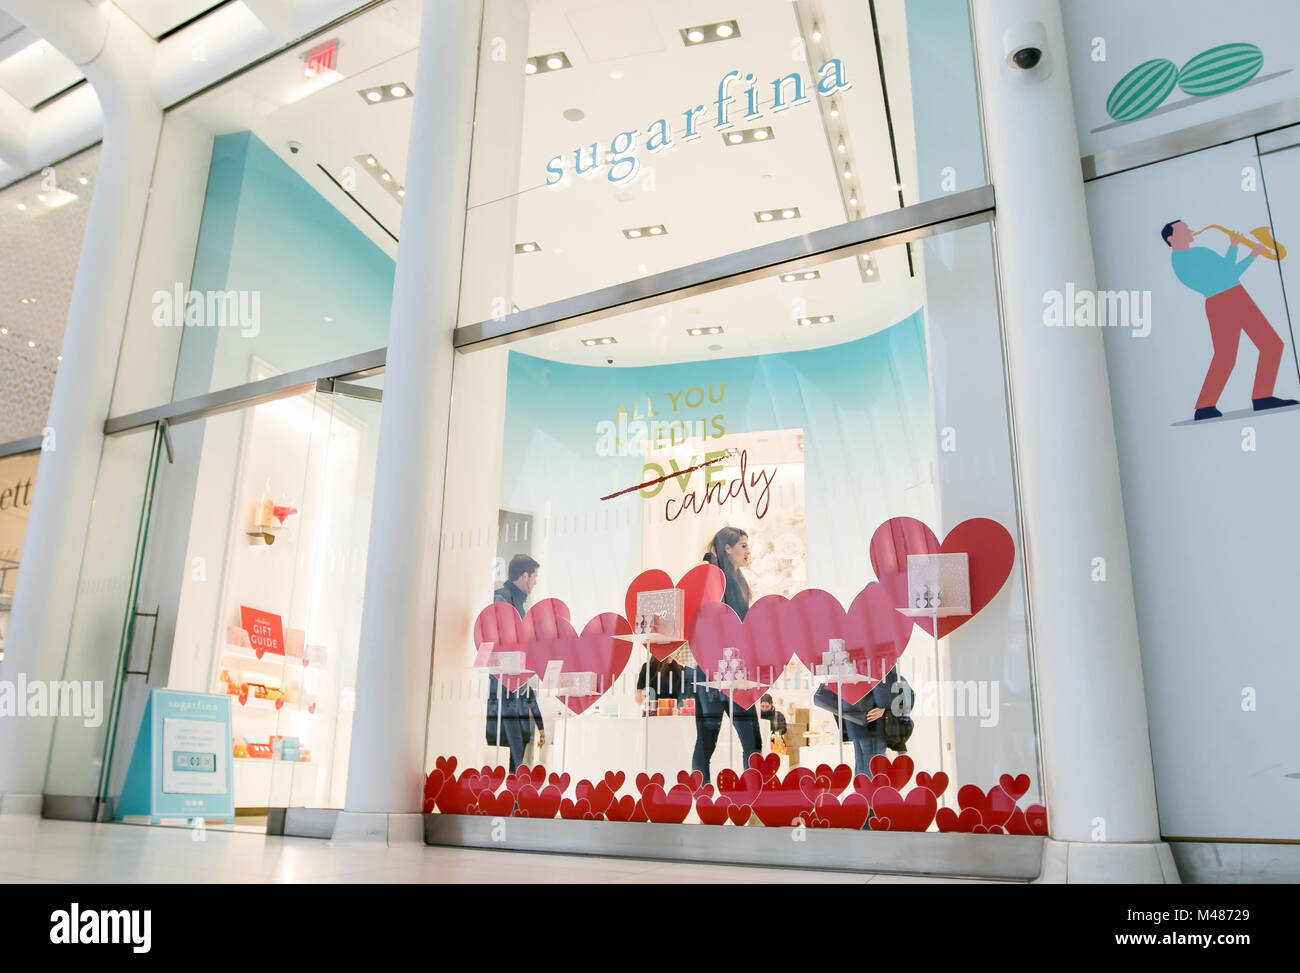 New York, Feb 9, 2018: Young man and woman are seen browsing a Sugarfina store. Stock Photo